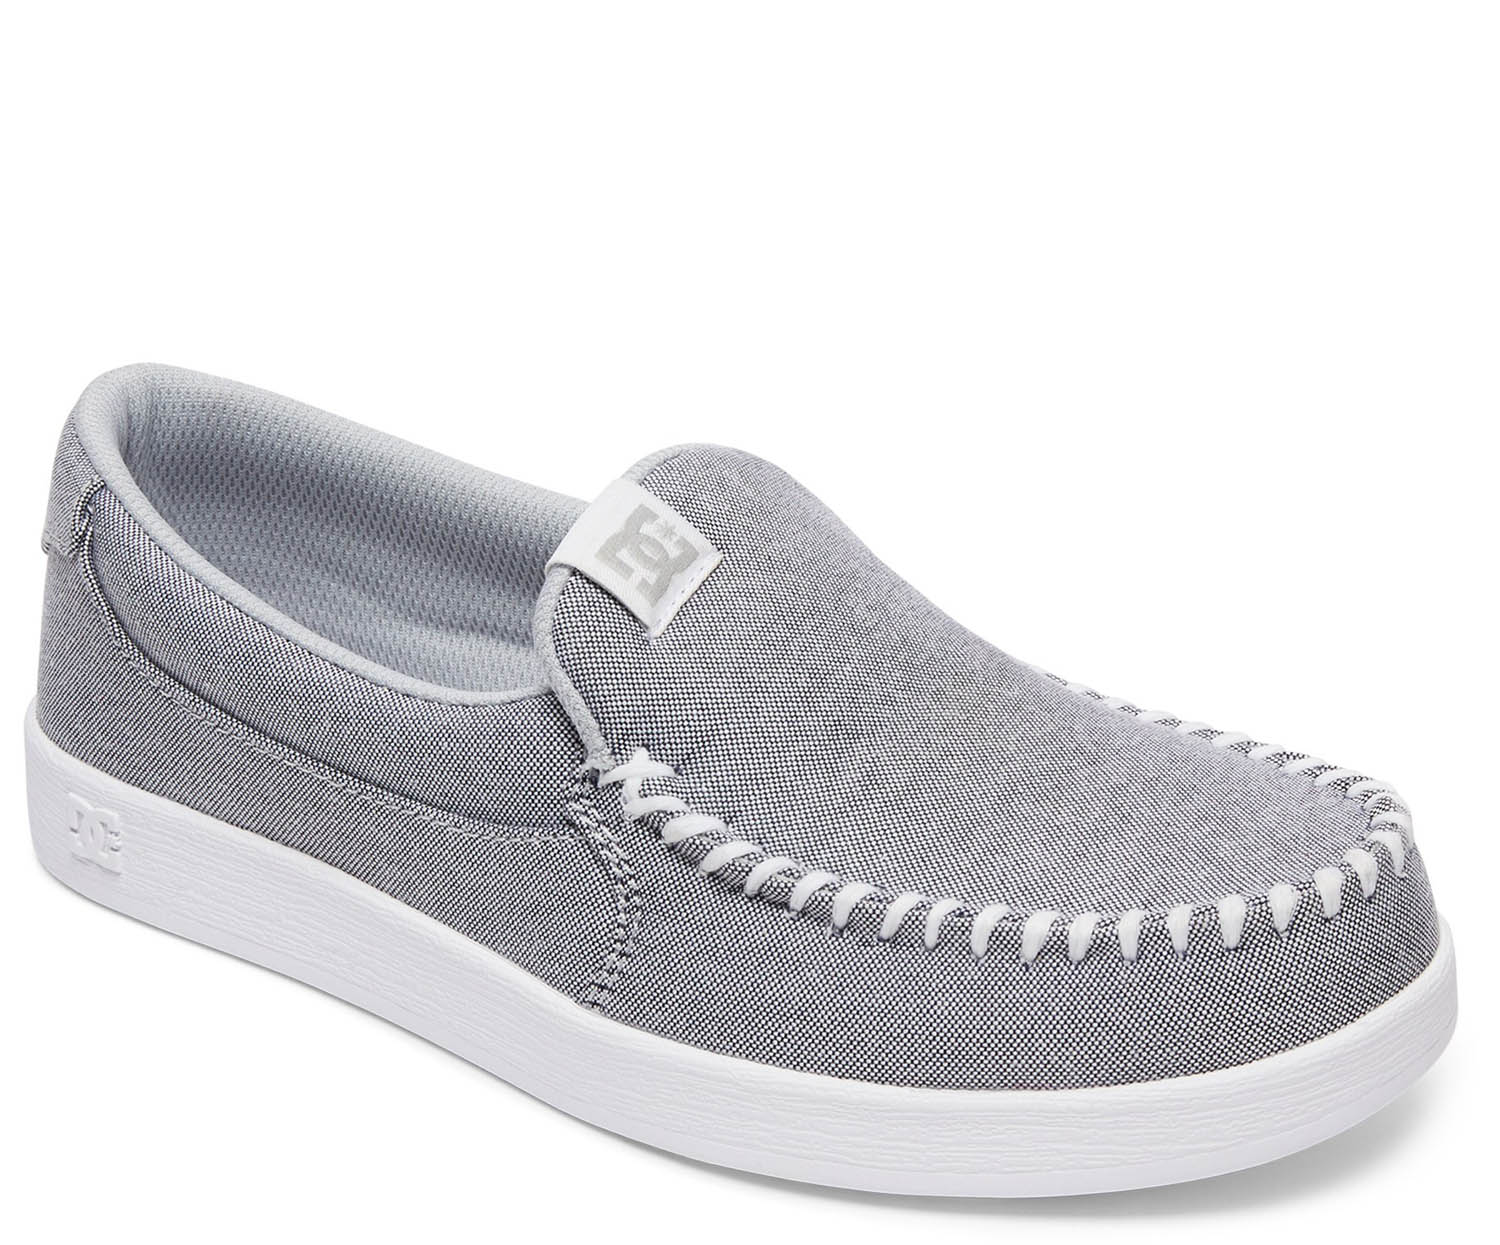 womens dc slip on shoes